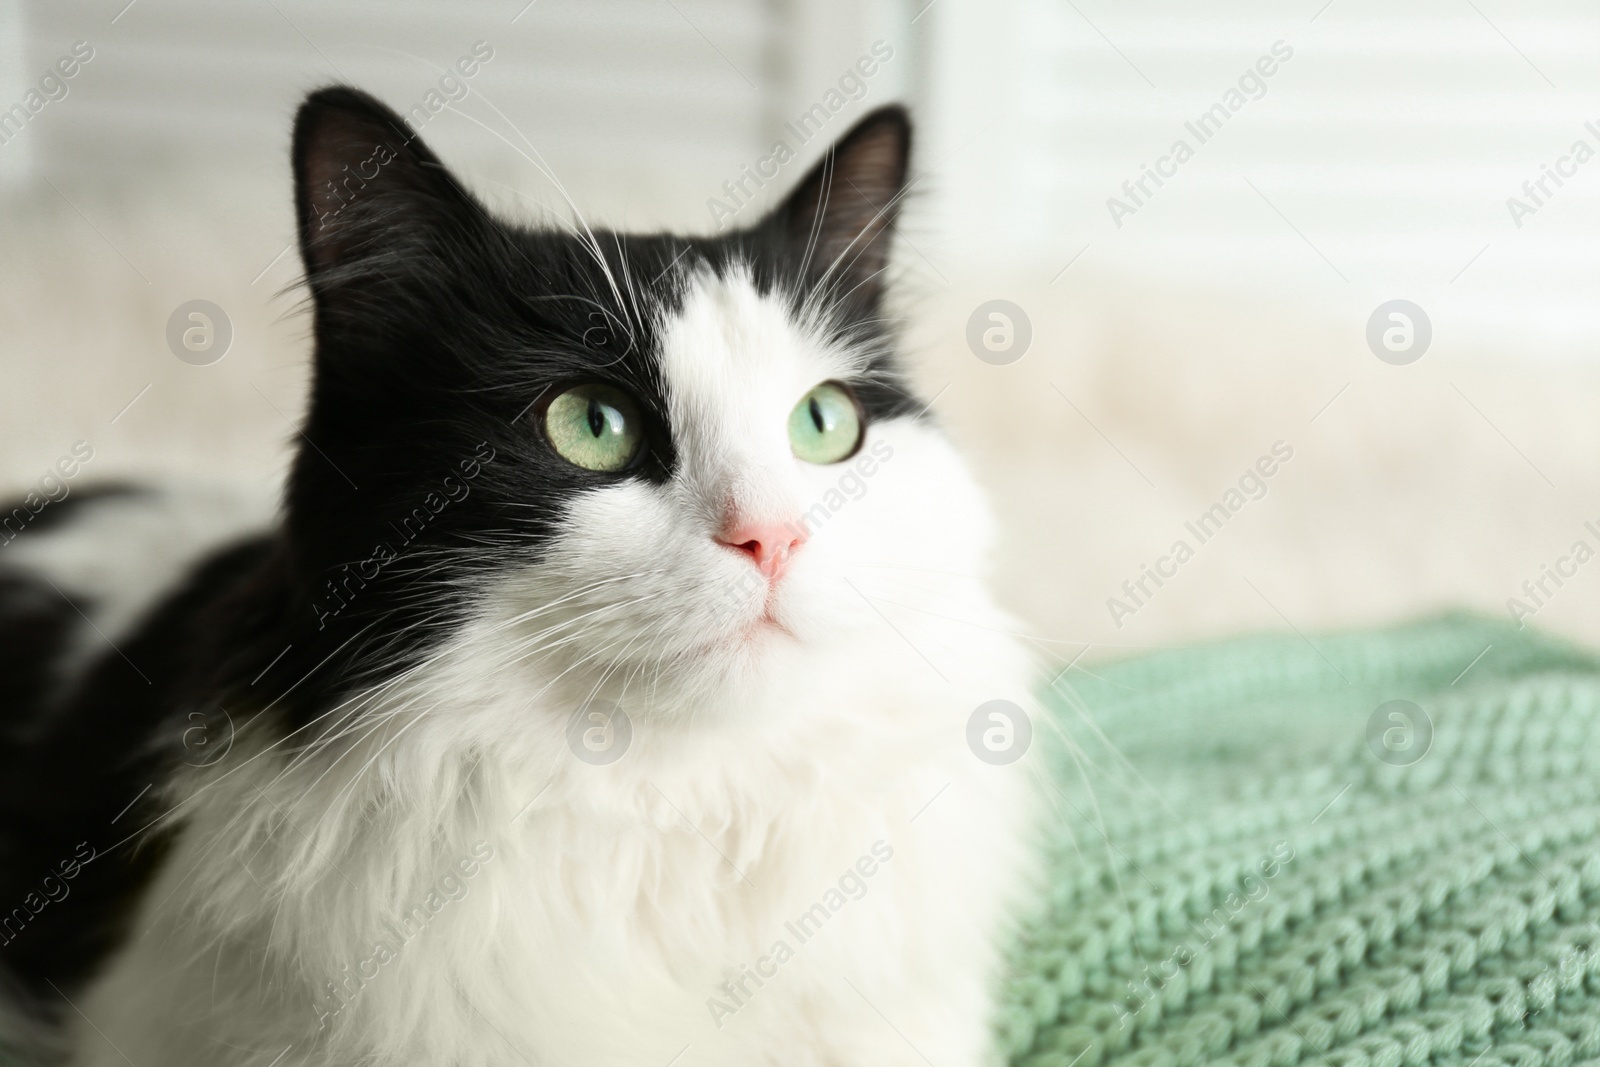 Photo of Cute cat relaxing on green knitted fabric. Lovely pet